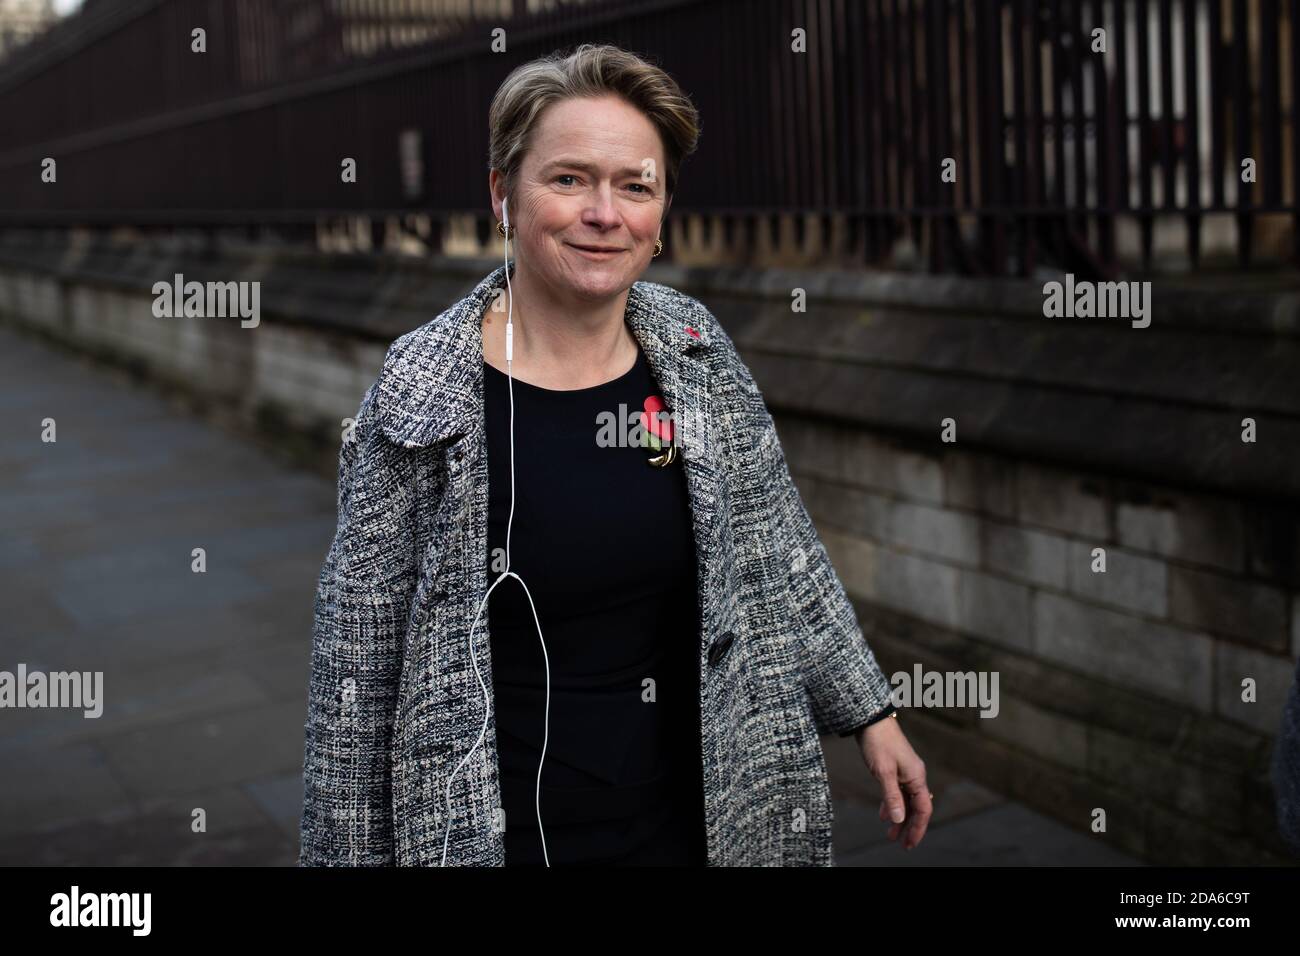 Baroness Dido Harding, Executive Chair of NHS Test and Trace, in Westminster, London, on her way to give evidence before the House of Commons Health and Social Care Committee and Science and Technology Committee. Stock Photo